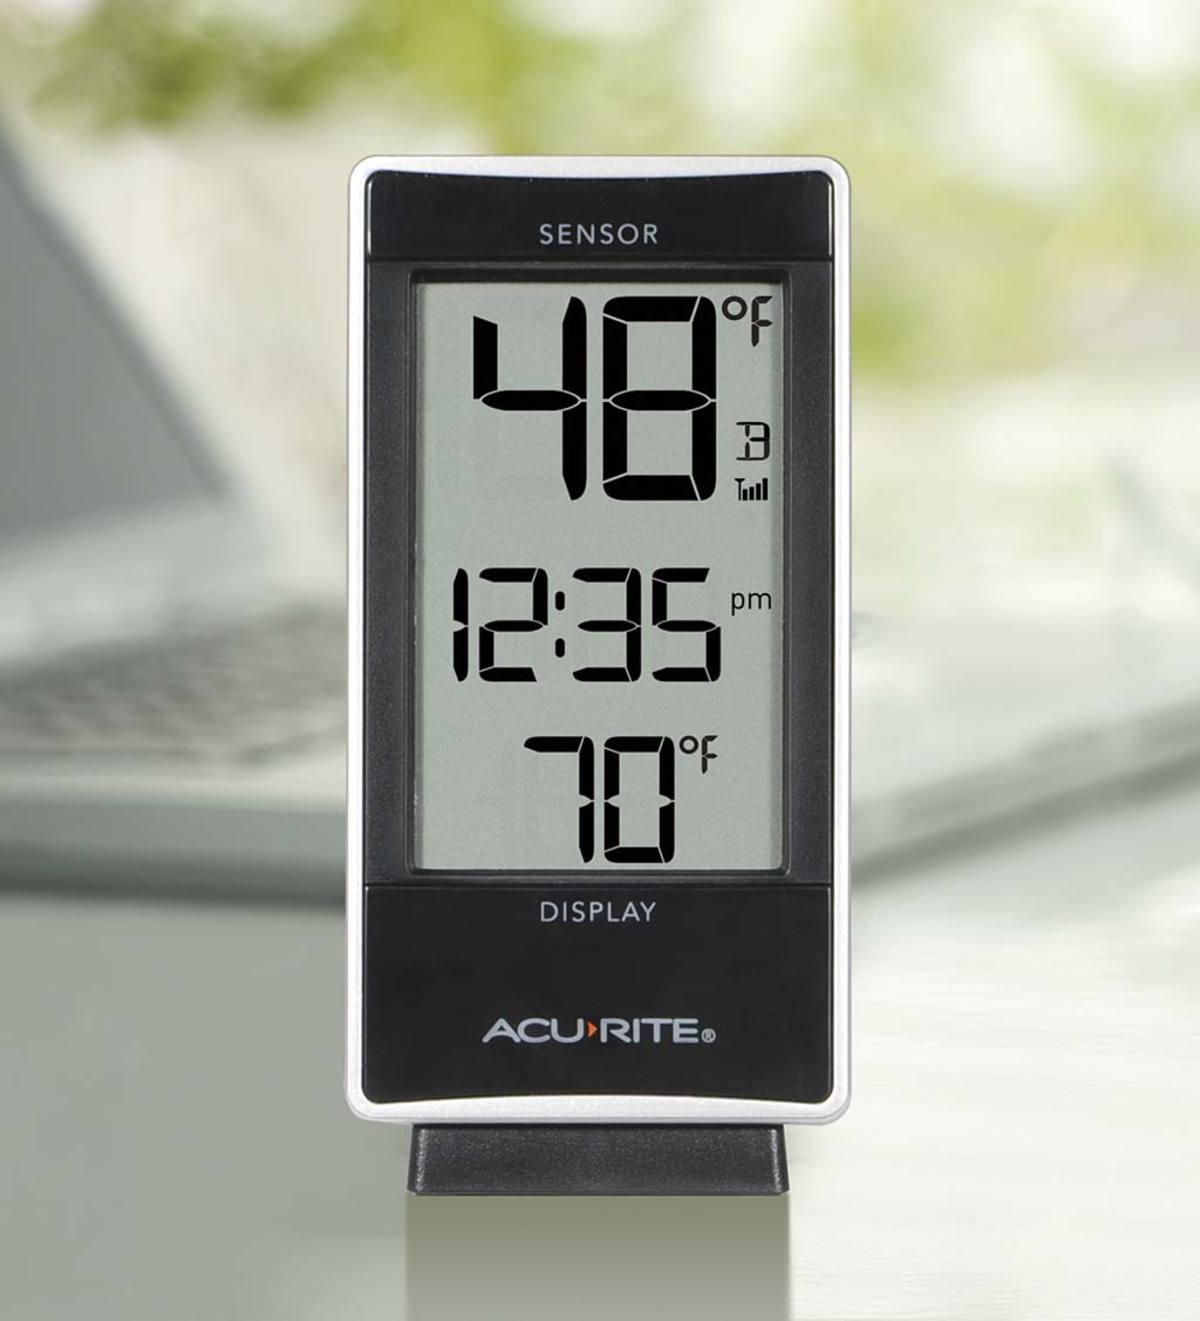 AcuRite Digital Clock and Thermometer with Remote Sensor